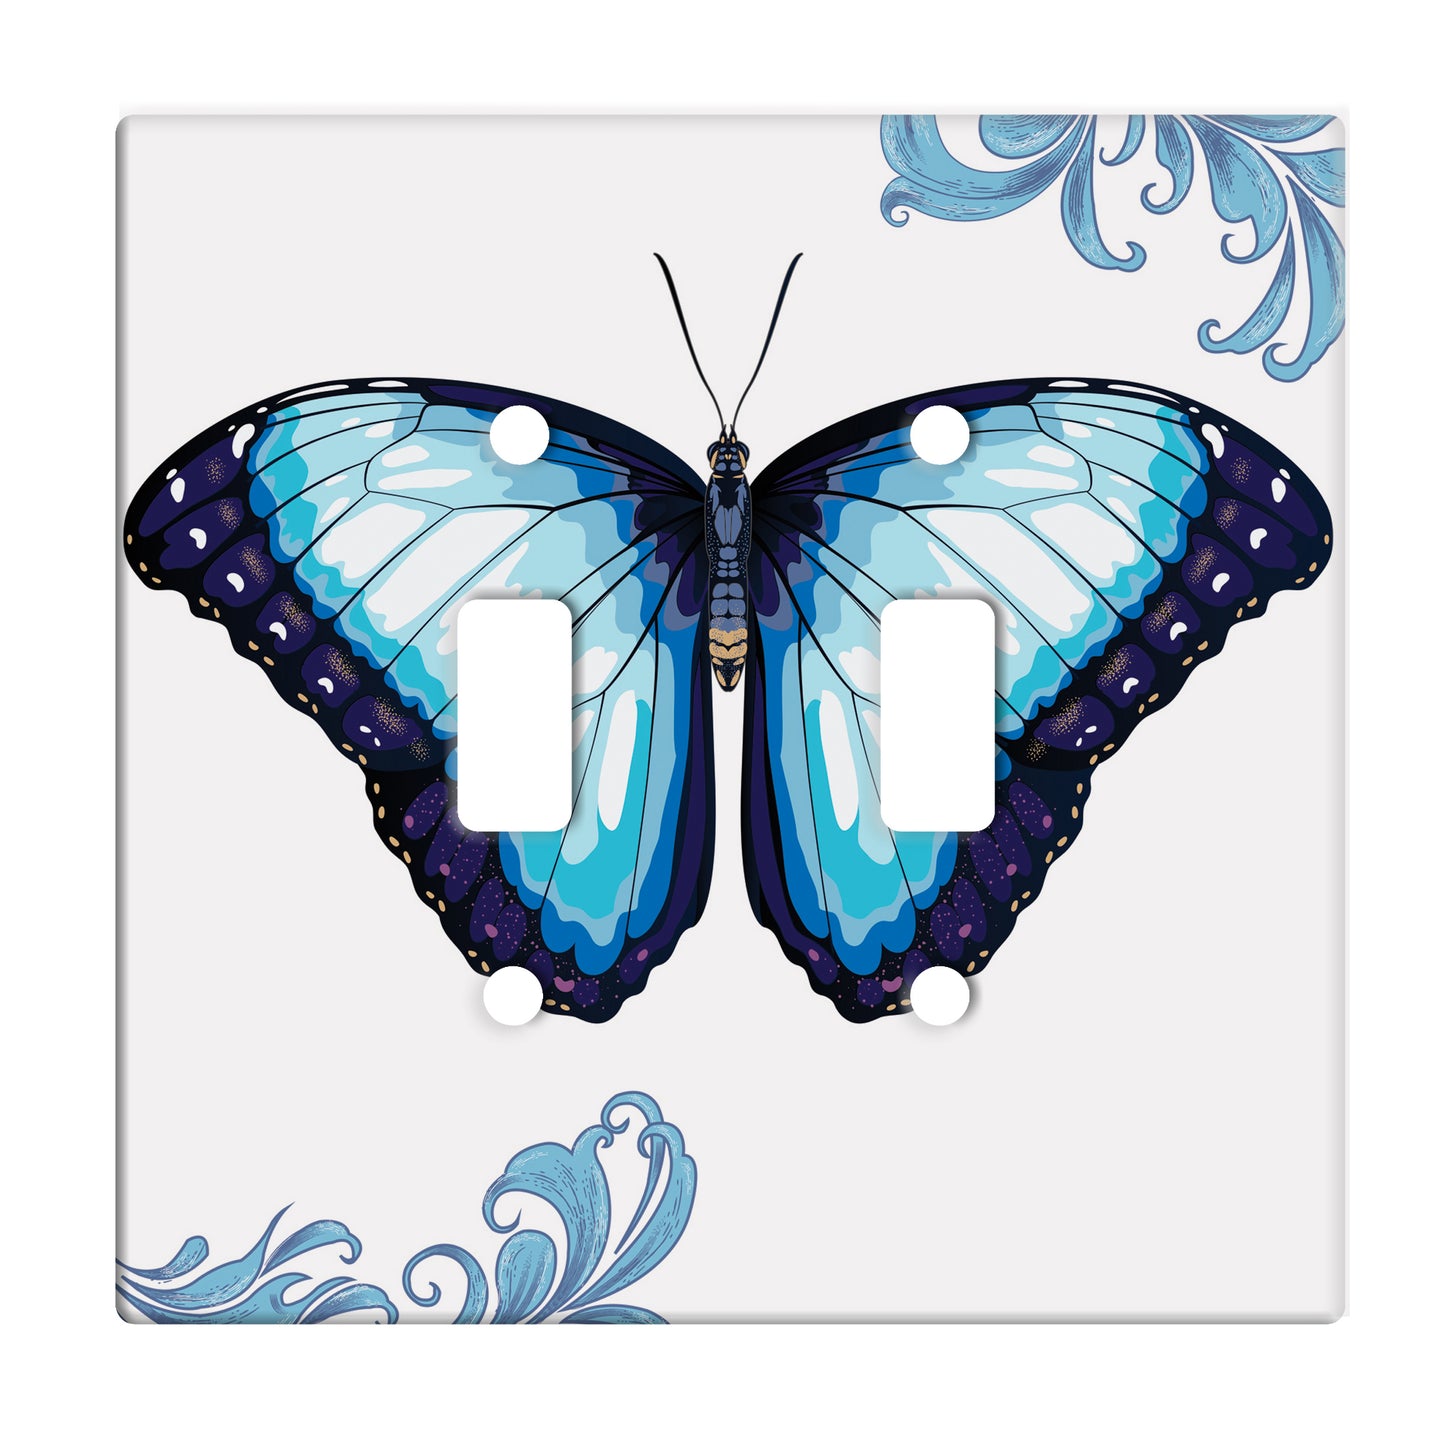 ceramic double toggle switch plate featuring a blue butterfly and decorative swirling blue accents. 